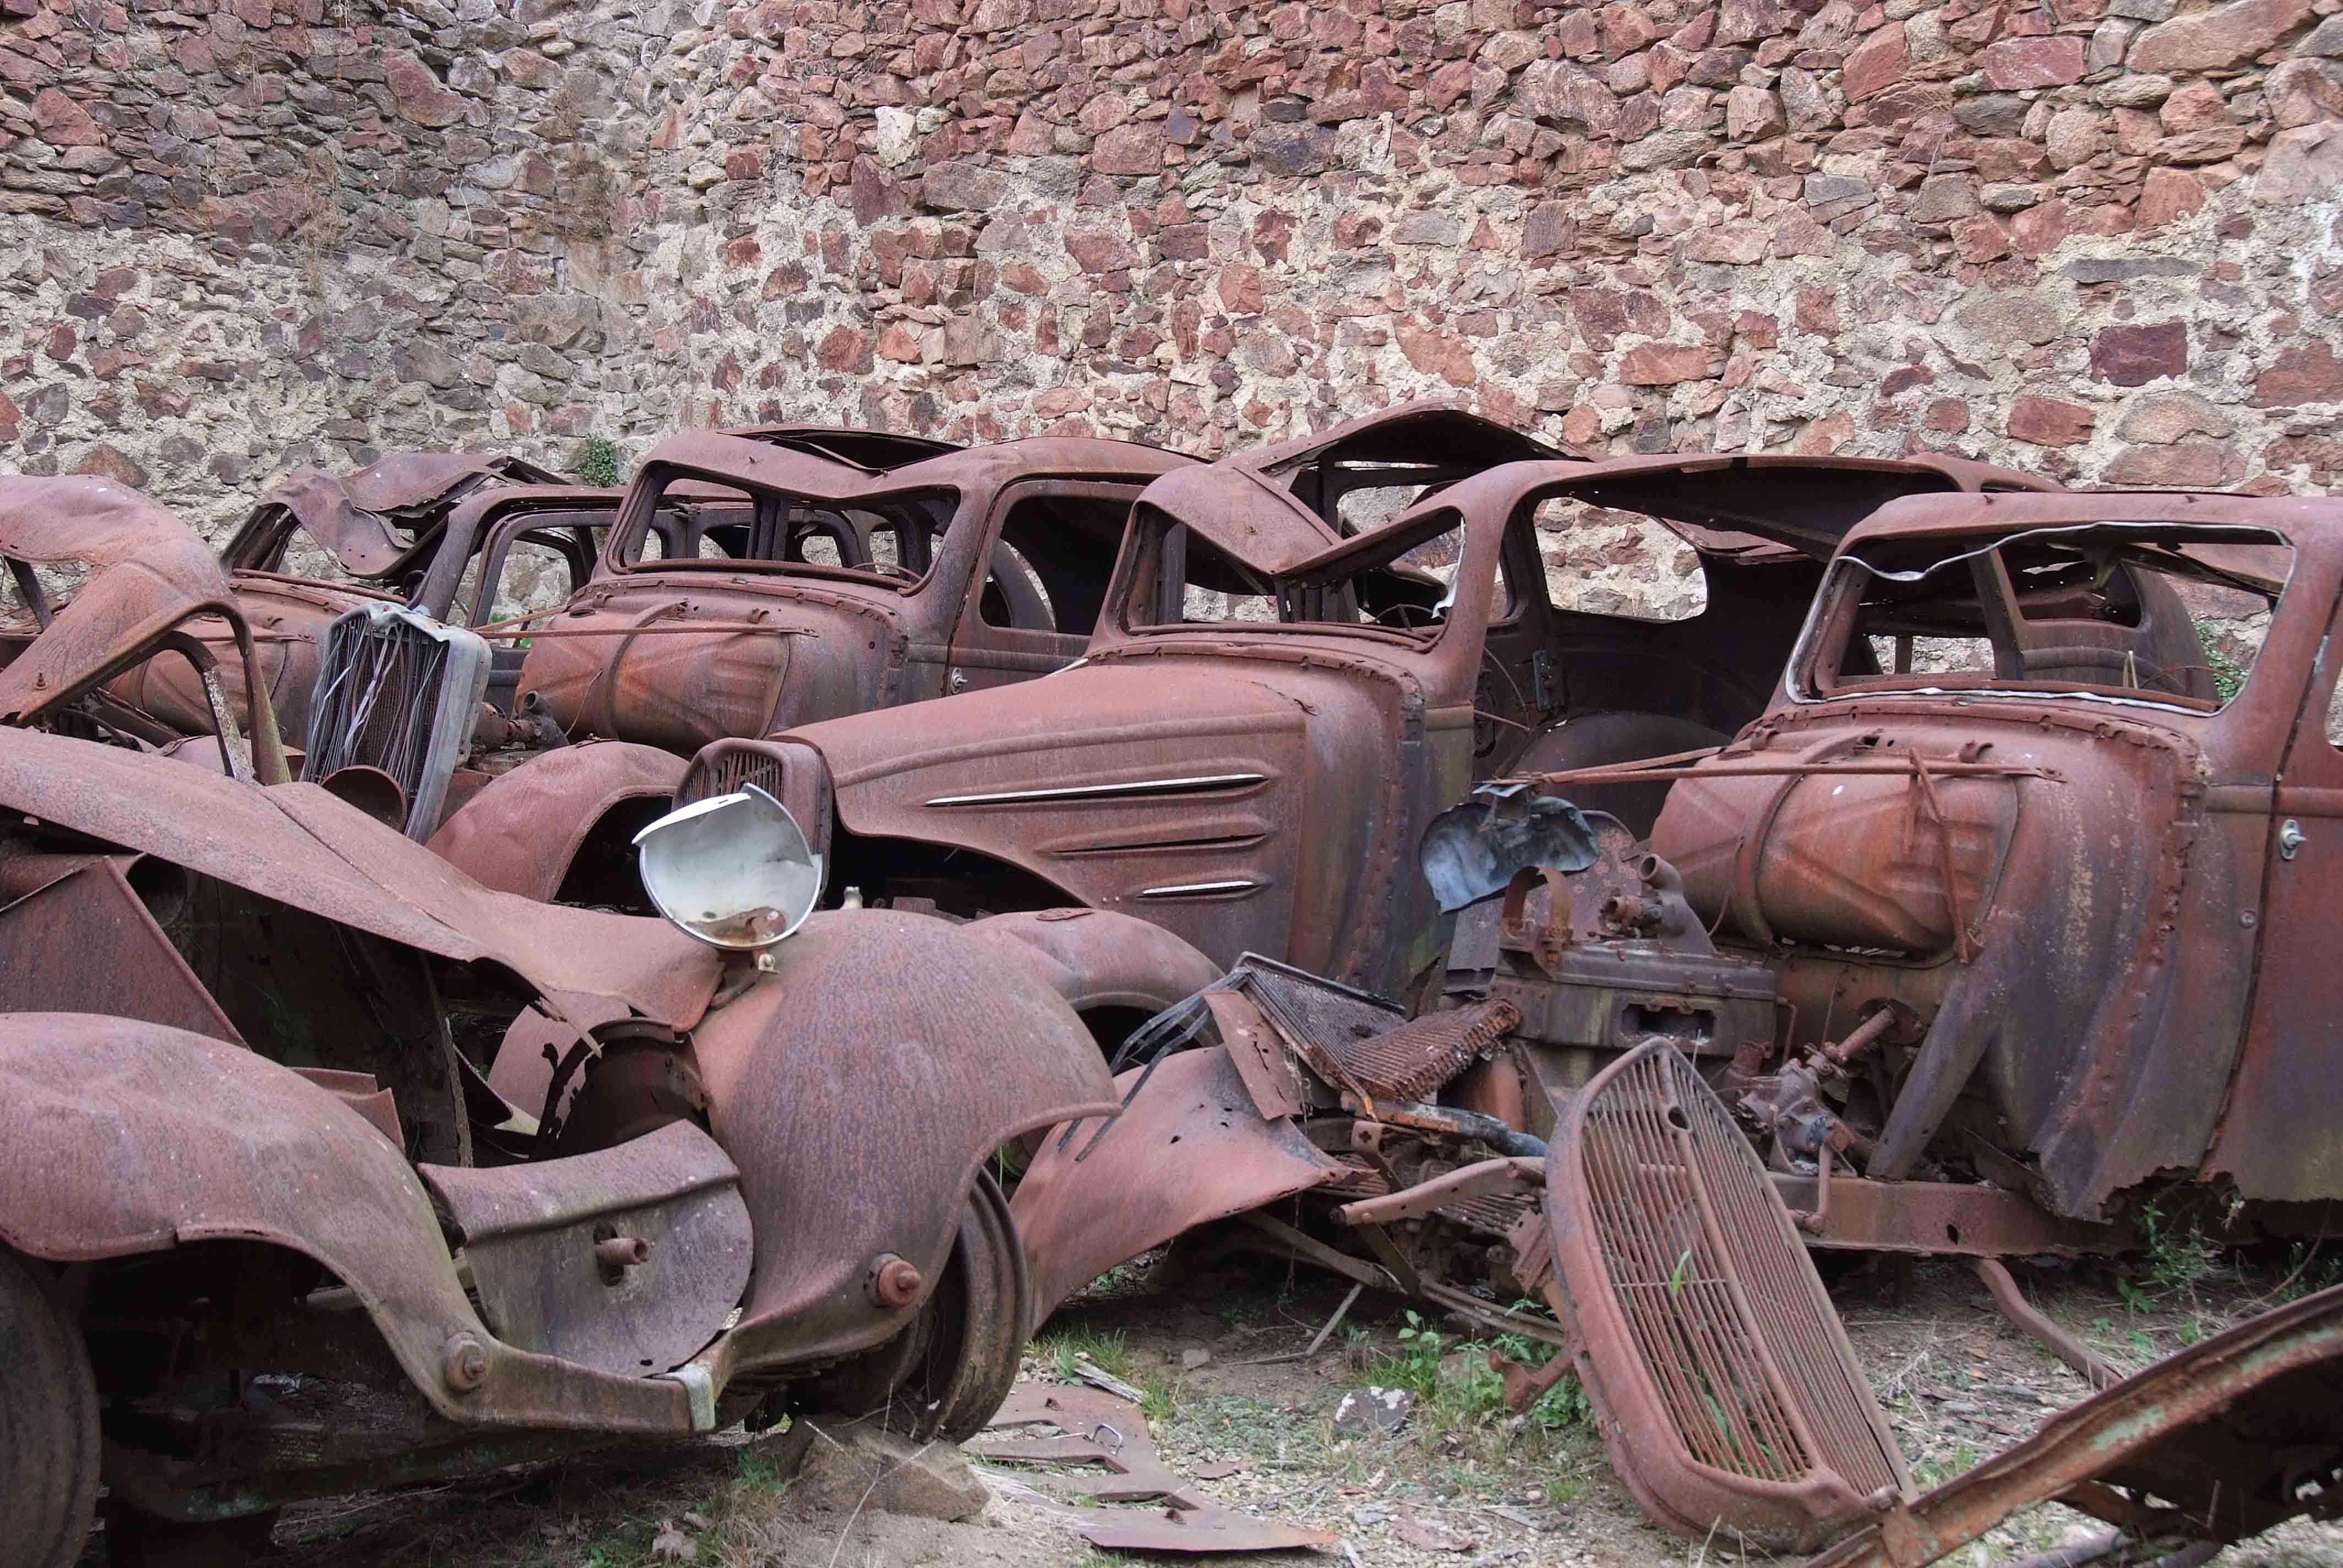 Classics left to die/rotting pics - Page 3 - Classic Cars and Yesterday's Heroes - PistonHeads